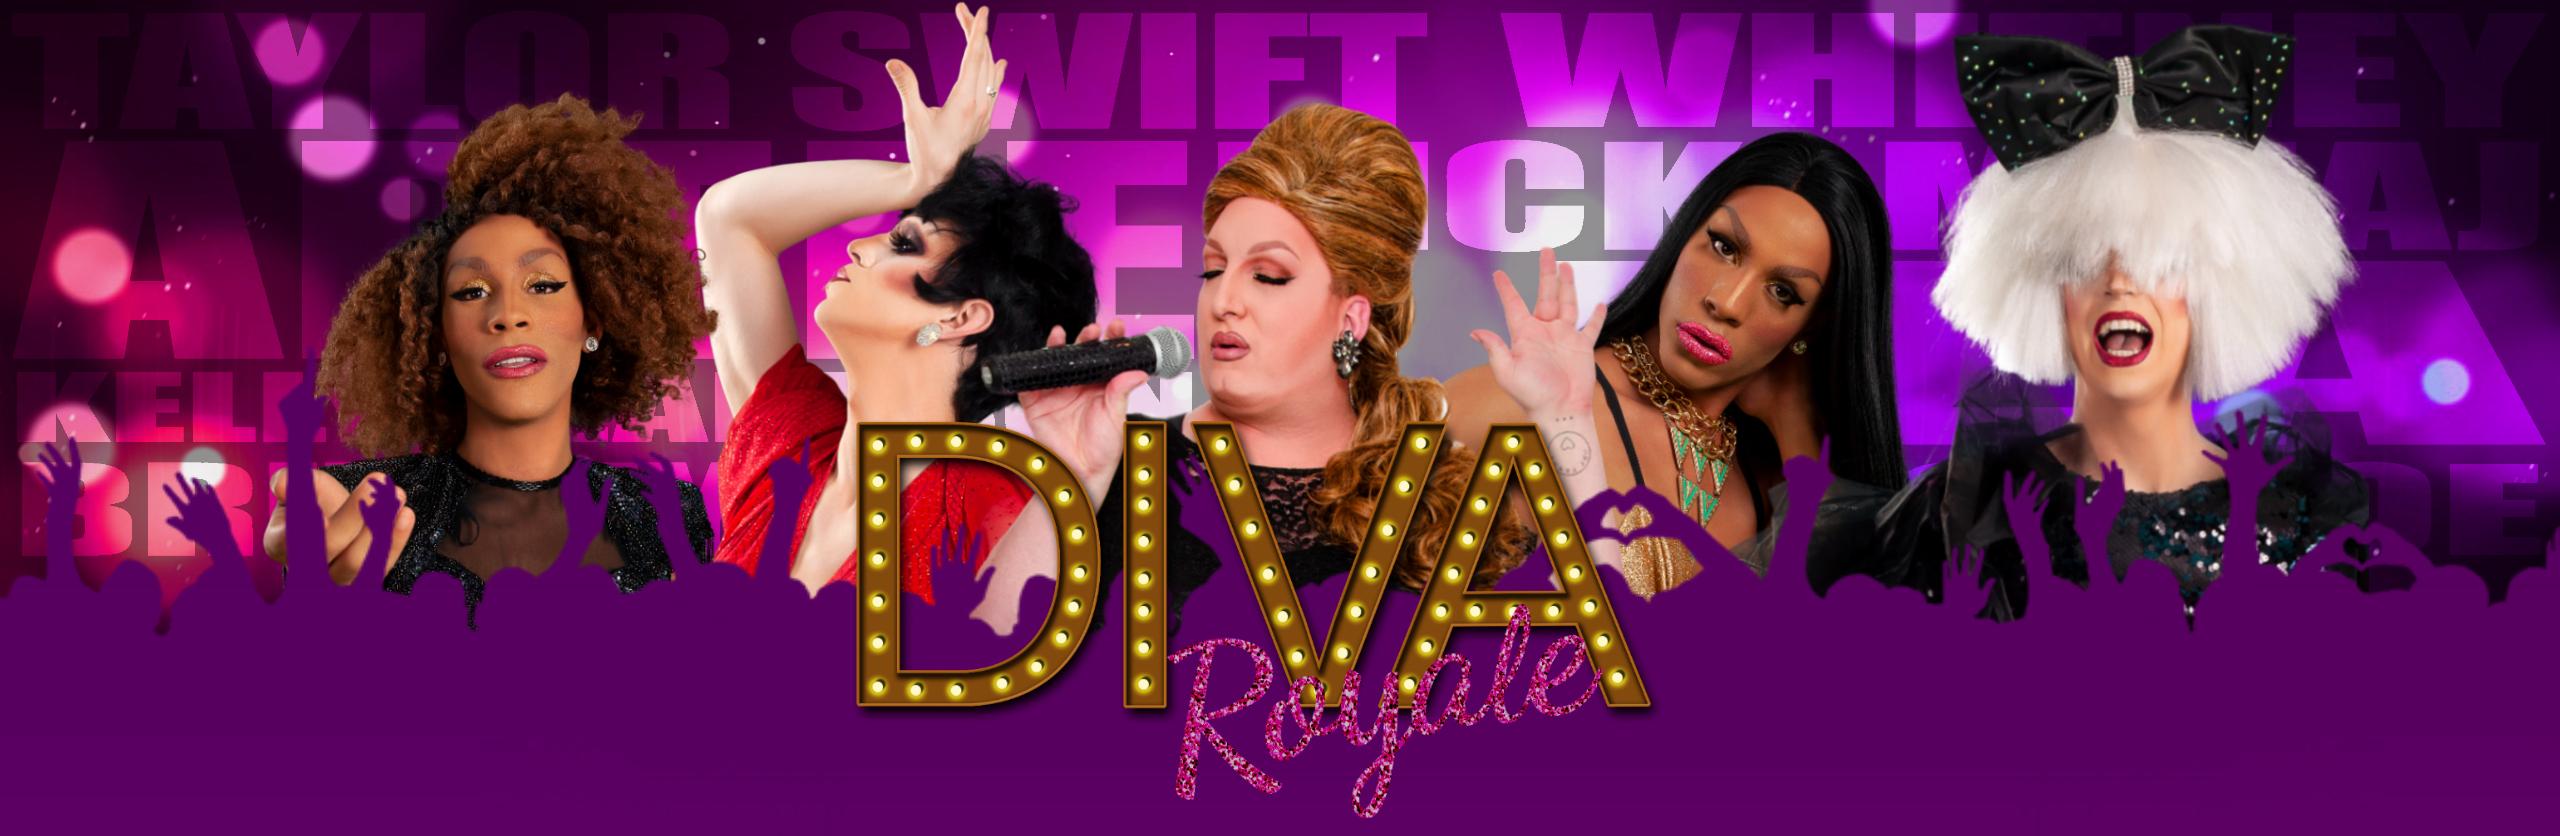 Diva Royale Show- Drag Queen Show San Diego CA